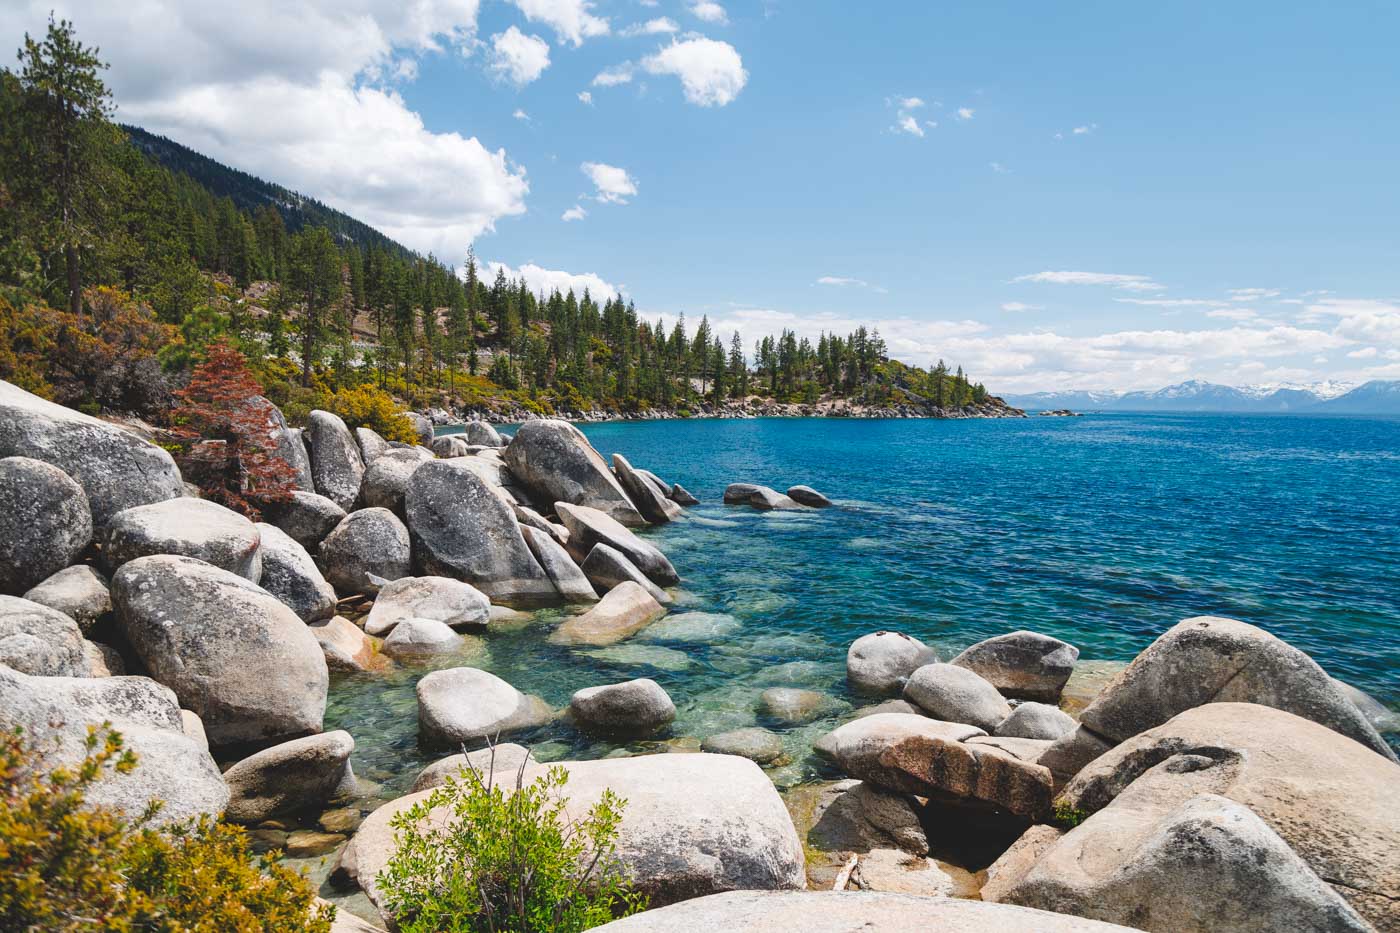 A view over the blue water around a rocky area of Lake Tahoe as seen from Memorial Point Scenic Lookout.